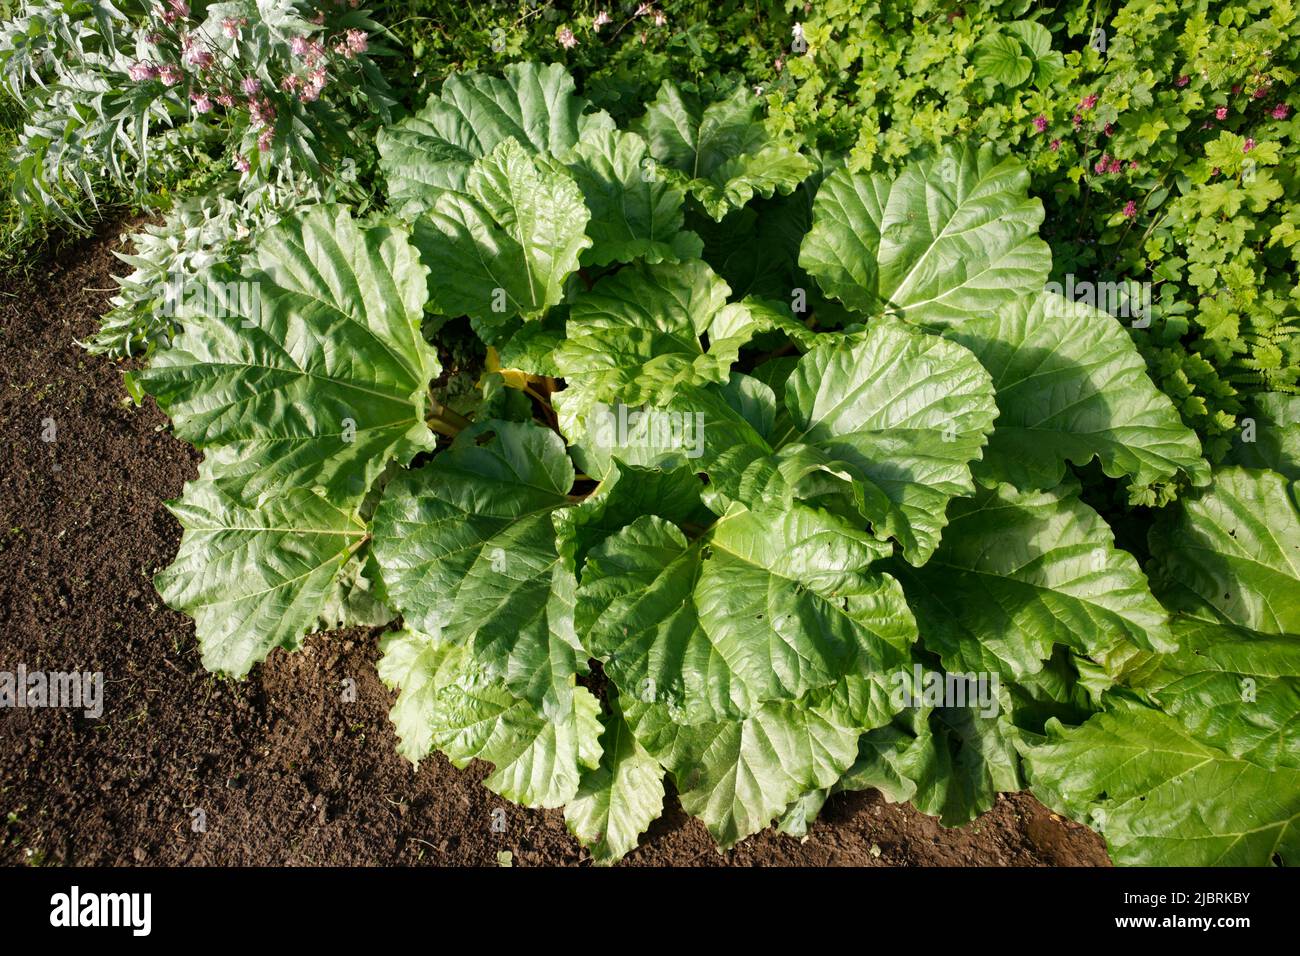 Tuft of rhubarb in a garden Stock Photo